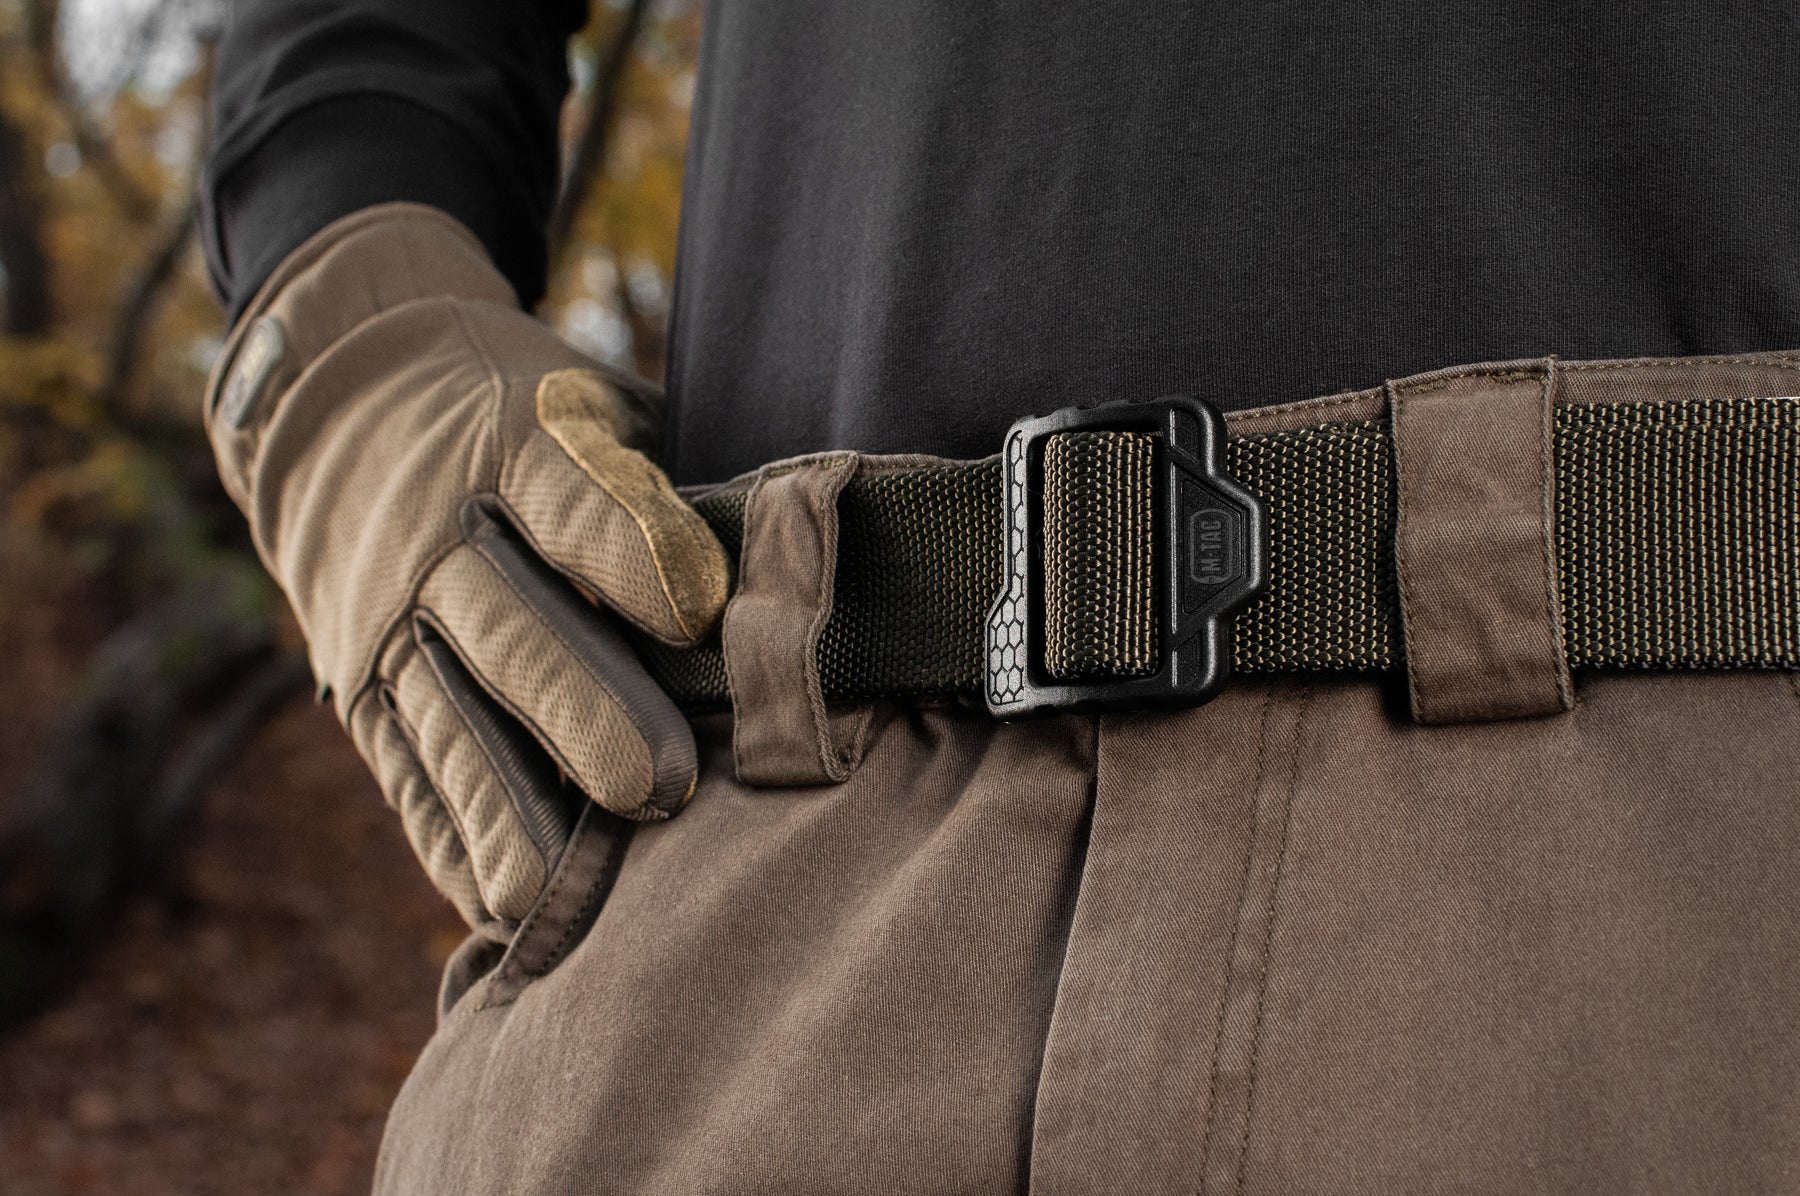 Tactical Military Duty Belts for Military and Civil